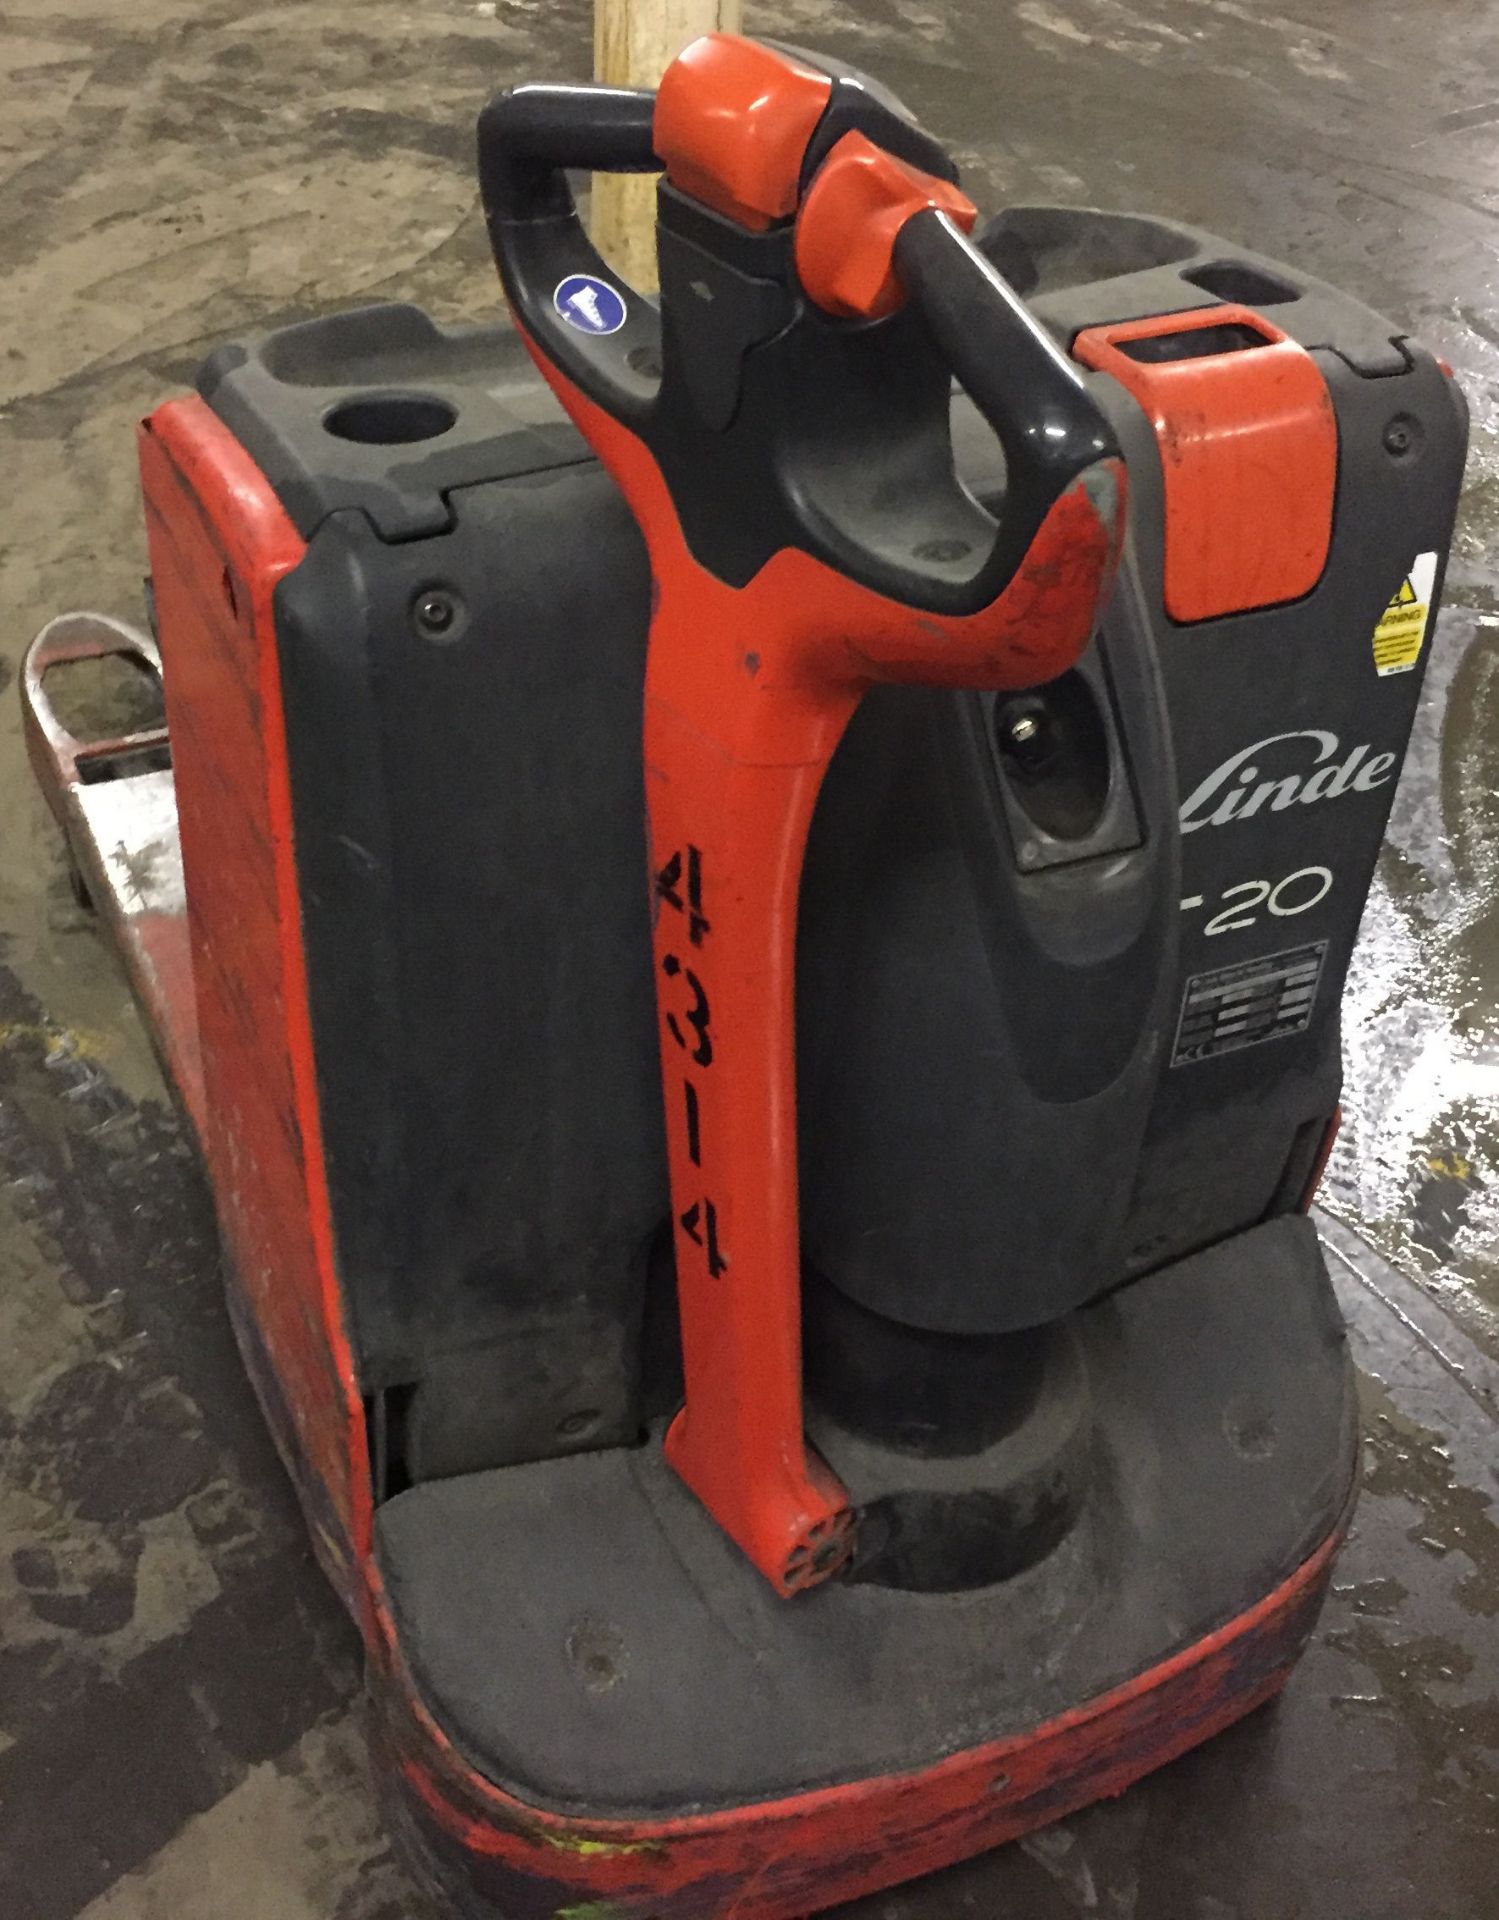 1 x Linde T20 Electric Pallet Truck - Tested and Working - Key and Charger Included - Bolton BL1 - Image 3 of 9